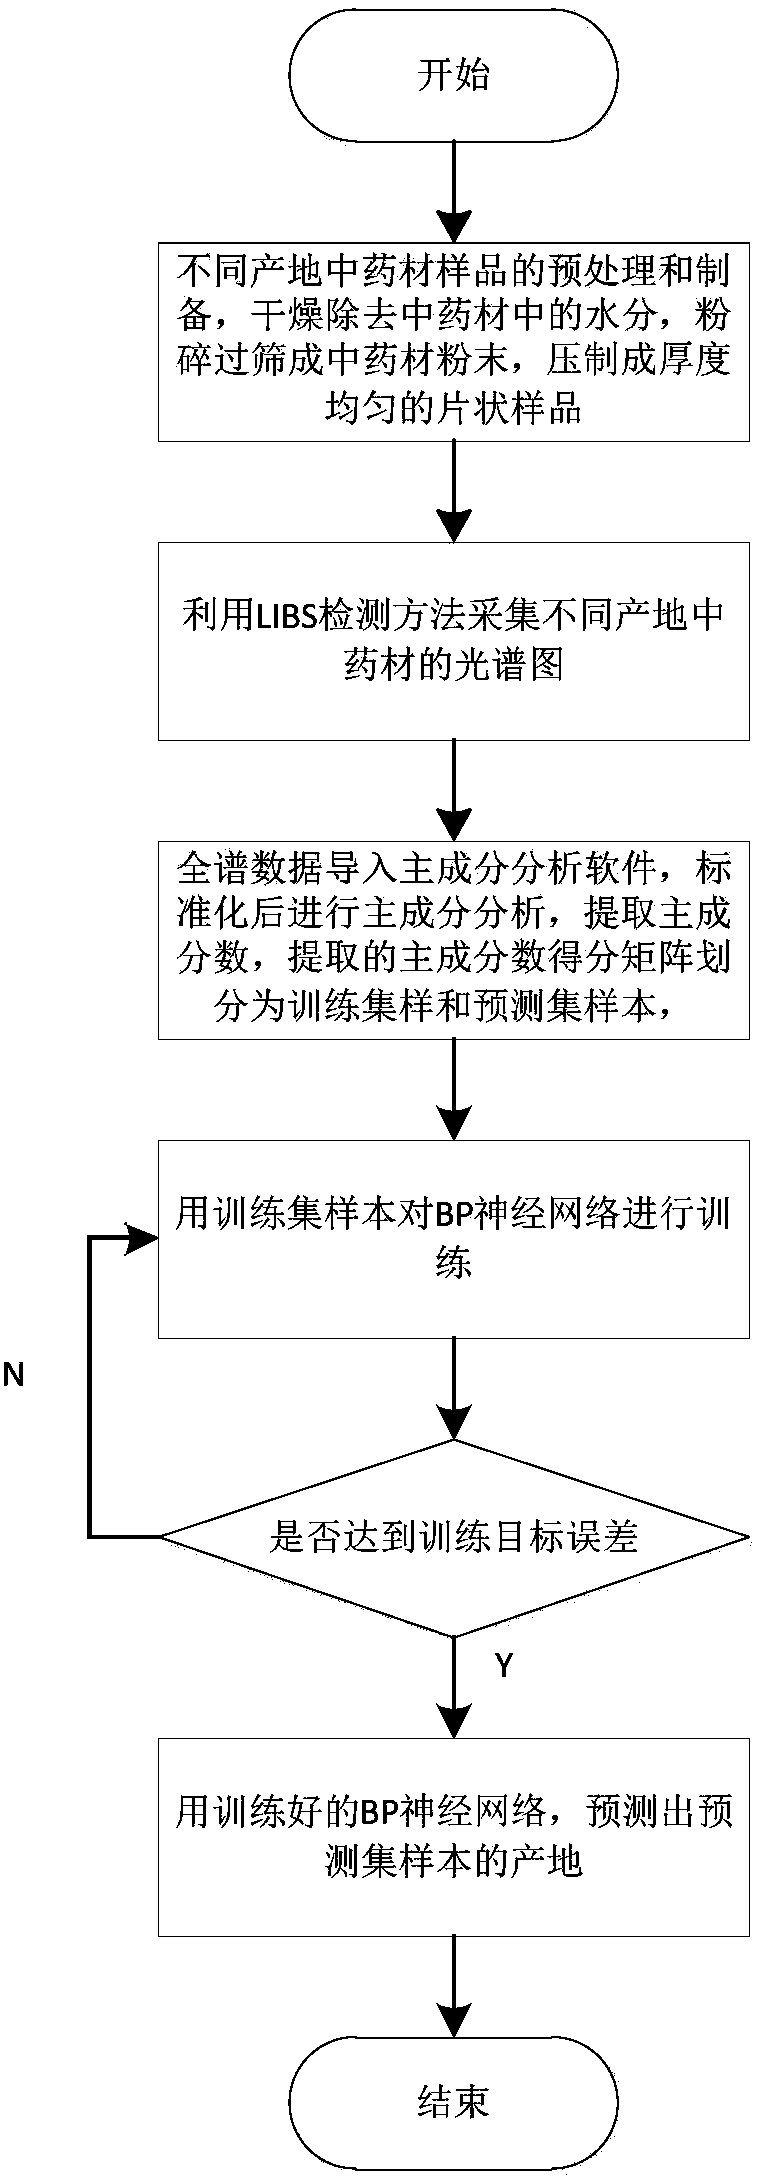 Traditional Chinese medicinal material production place determination method based on principal component analysis and BP neural network